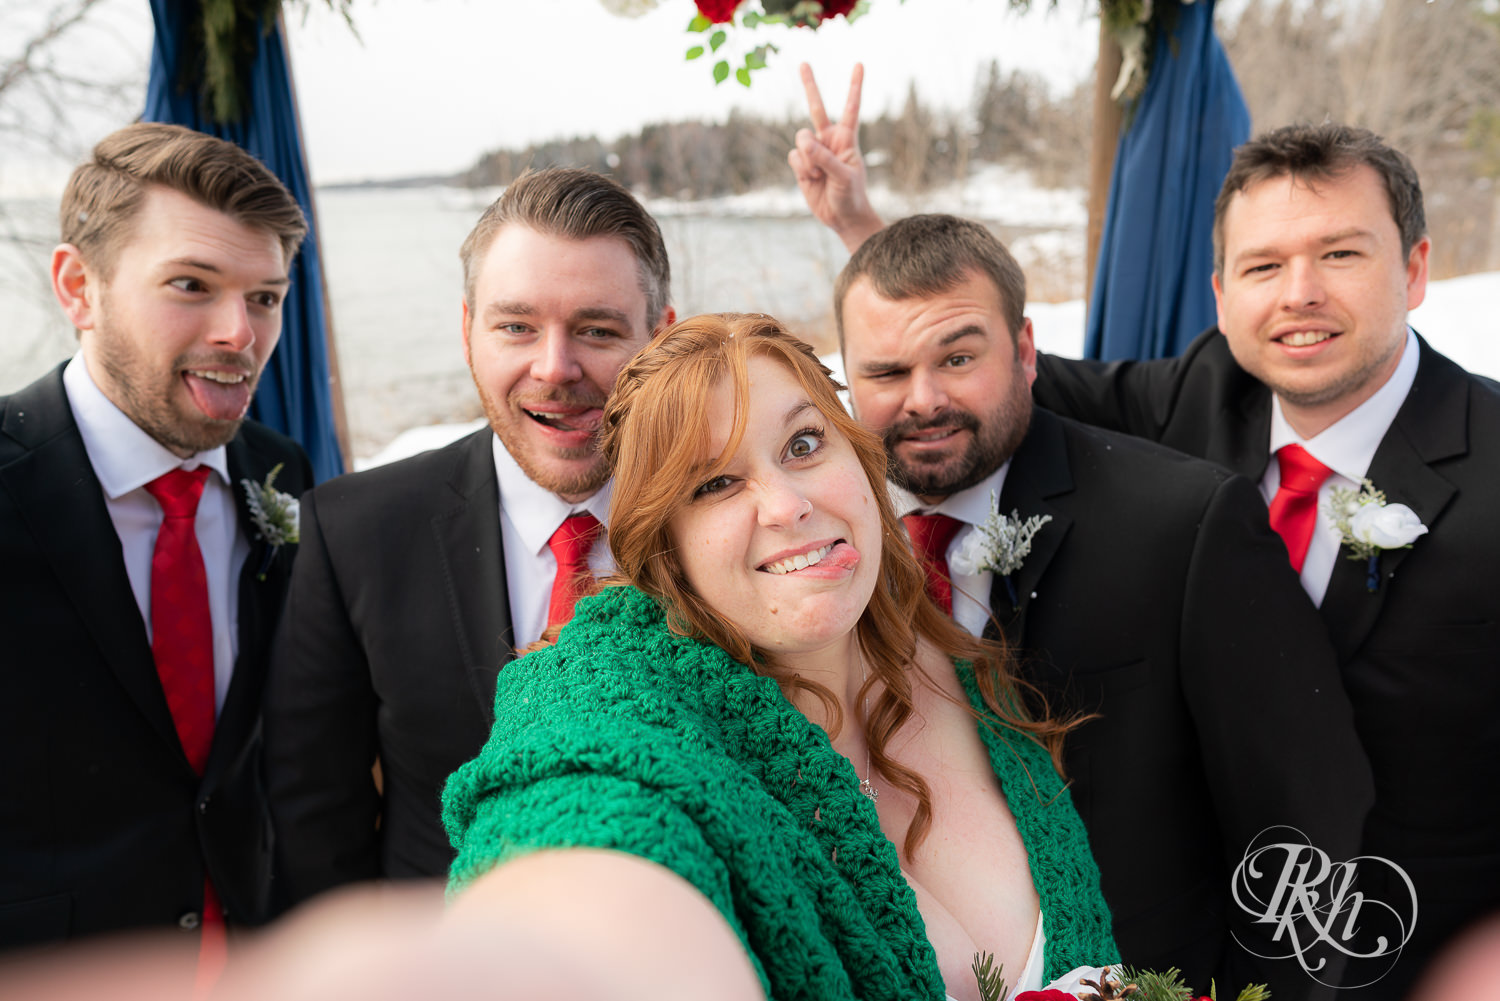 Winter wedding party in the snow at Grand Superior Lodge in Two Harbors, Minnesota.